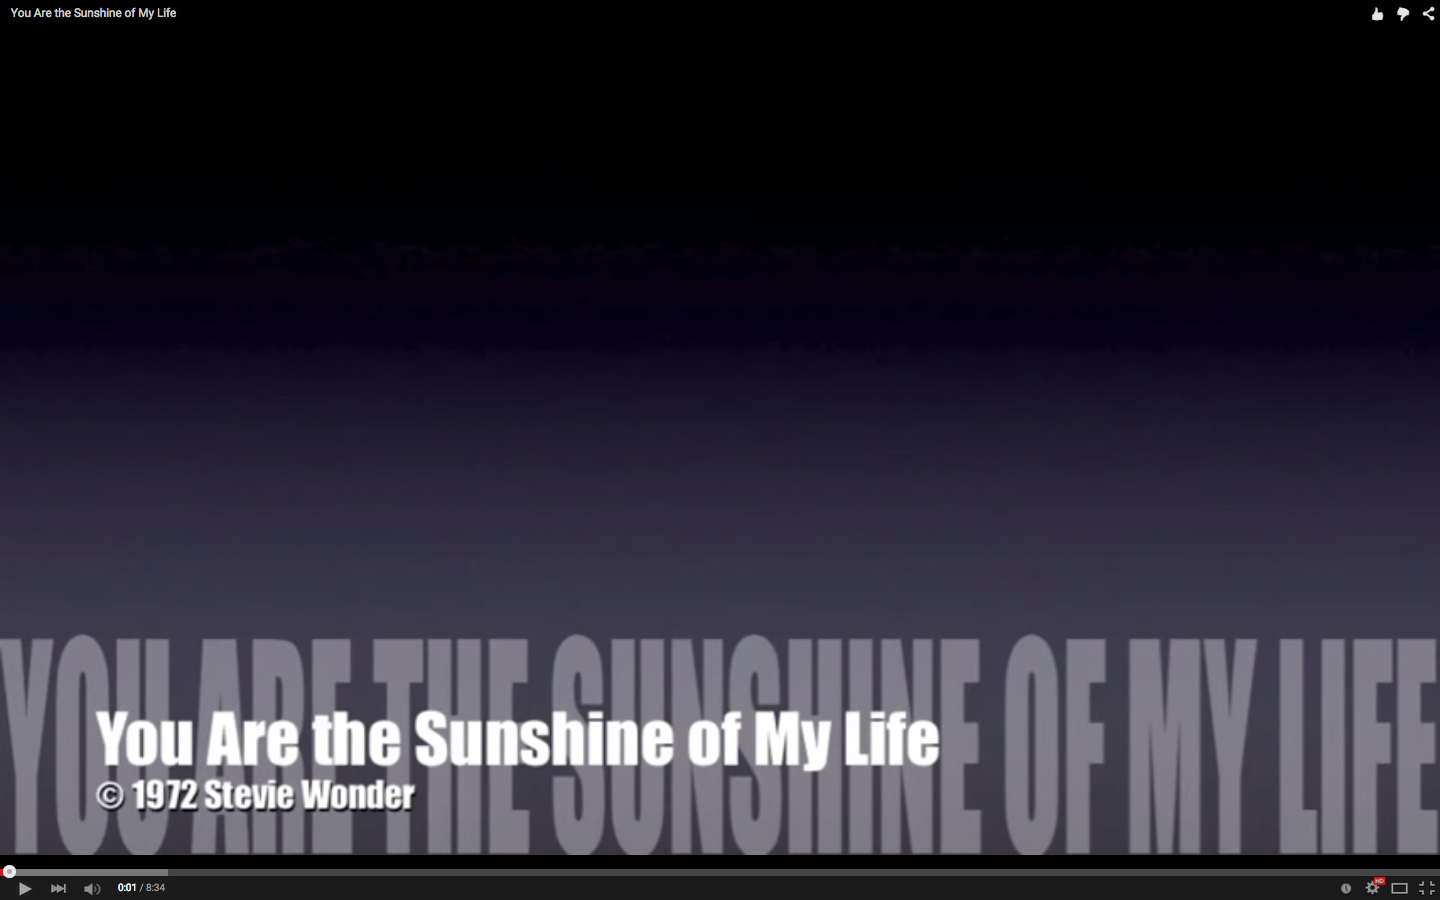 You Are The Sunshine of My Life (guitar chart)